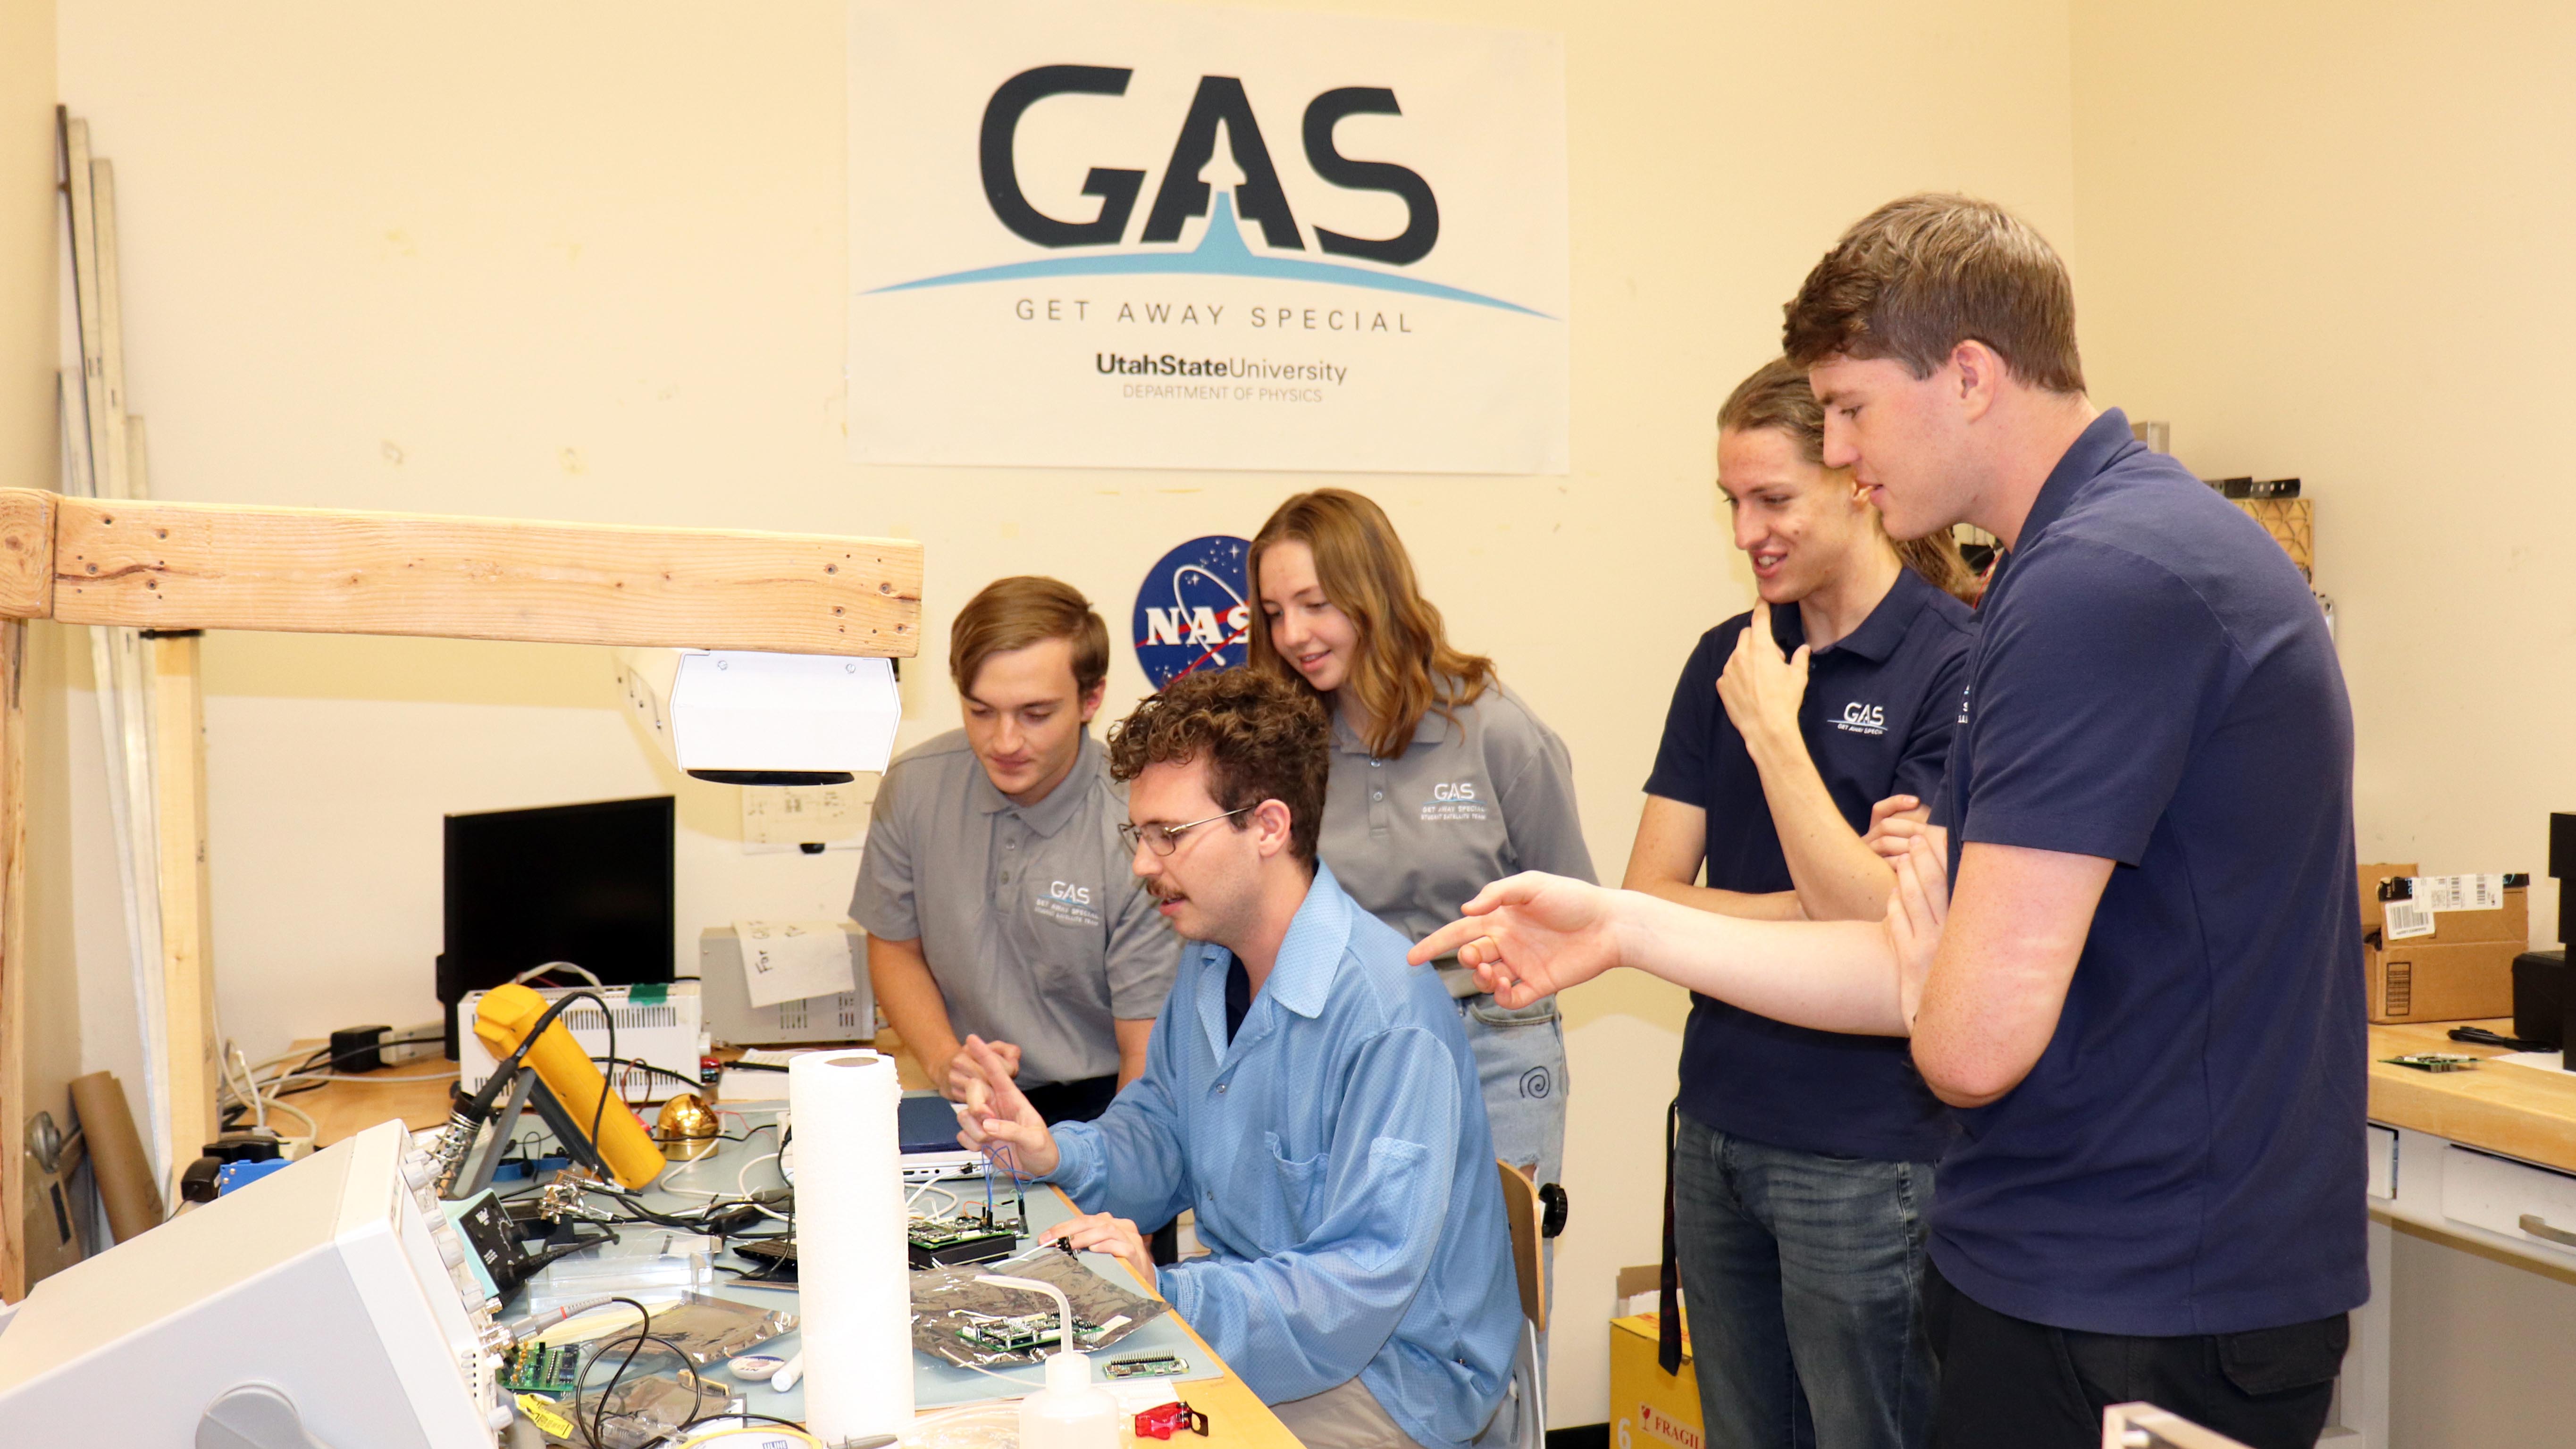 The GAS team students